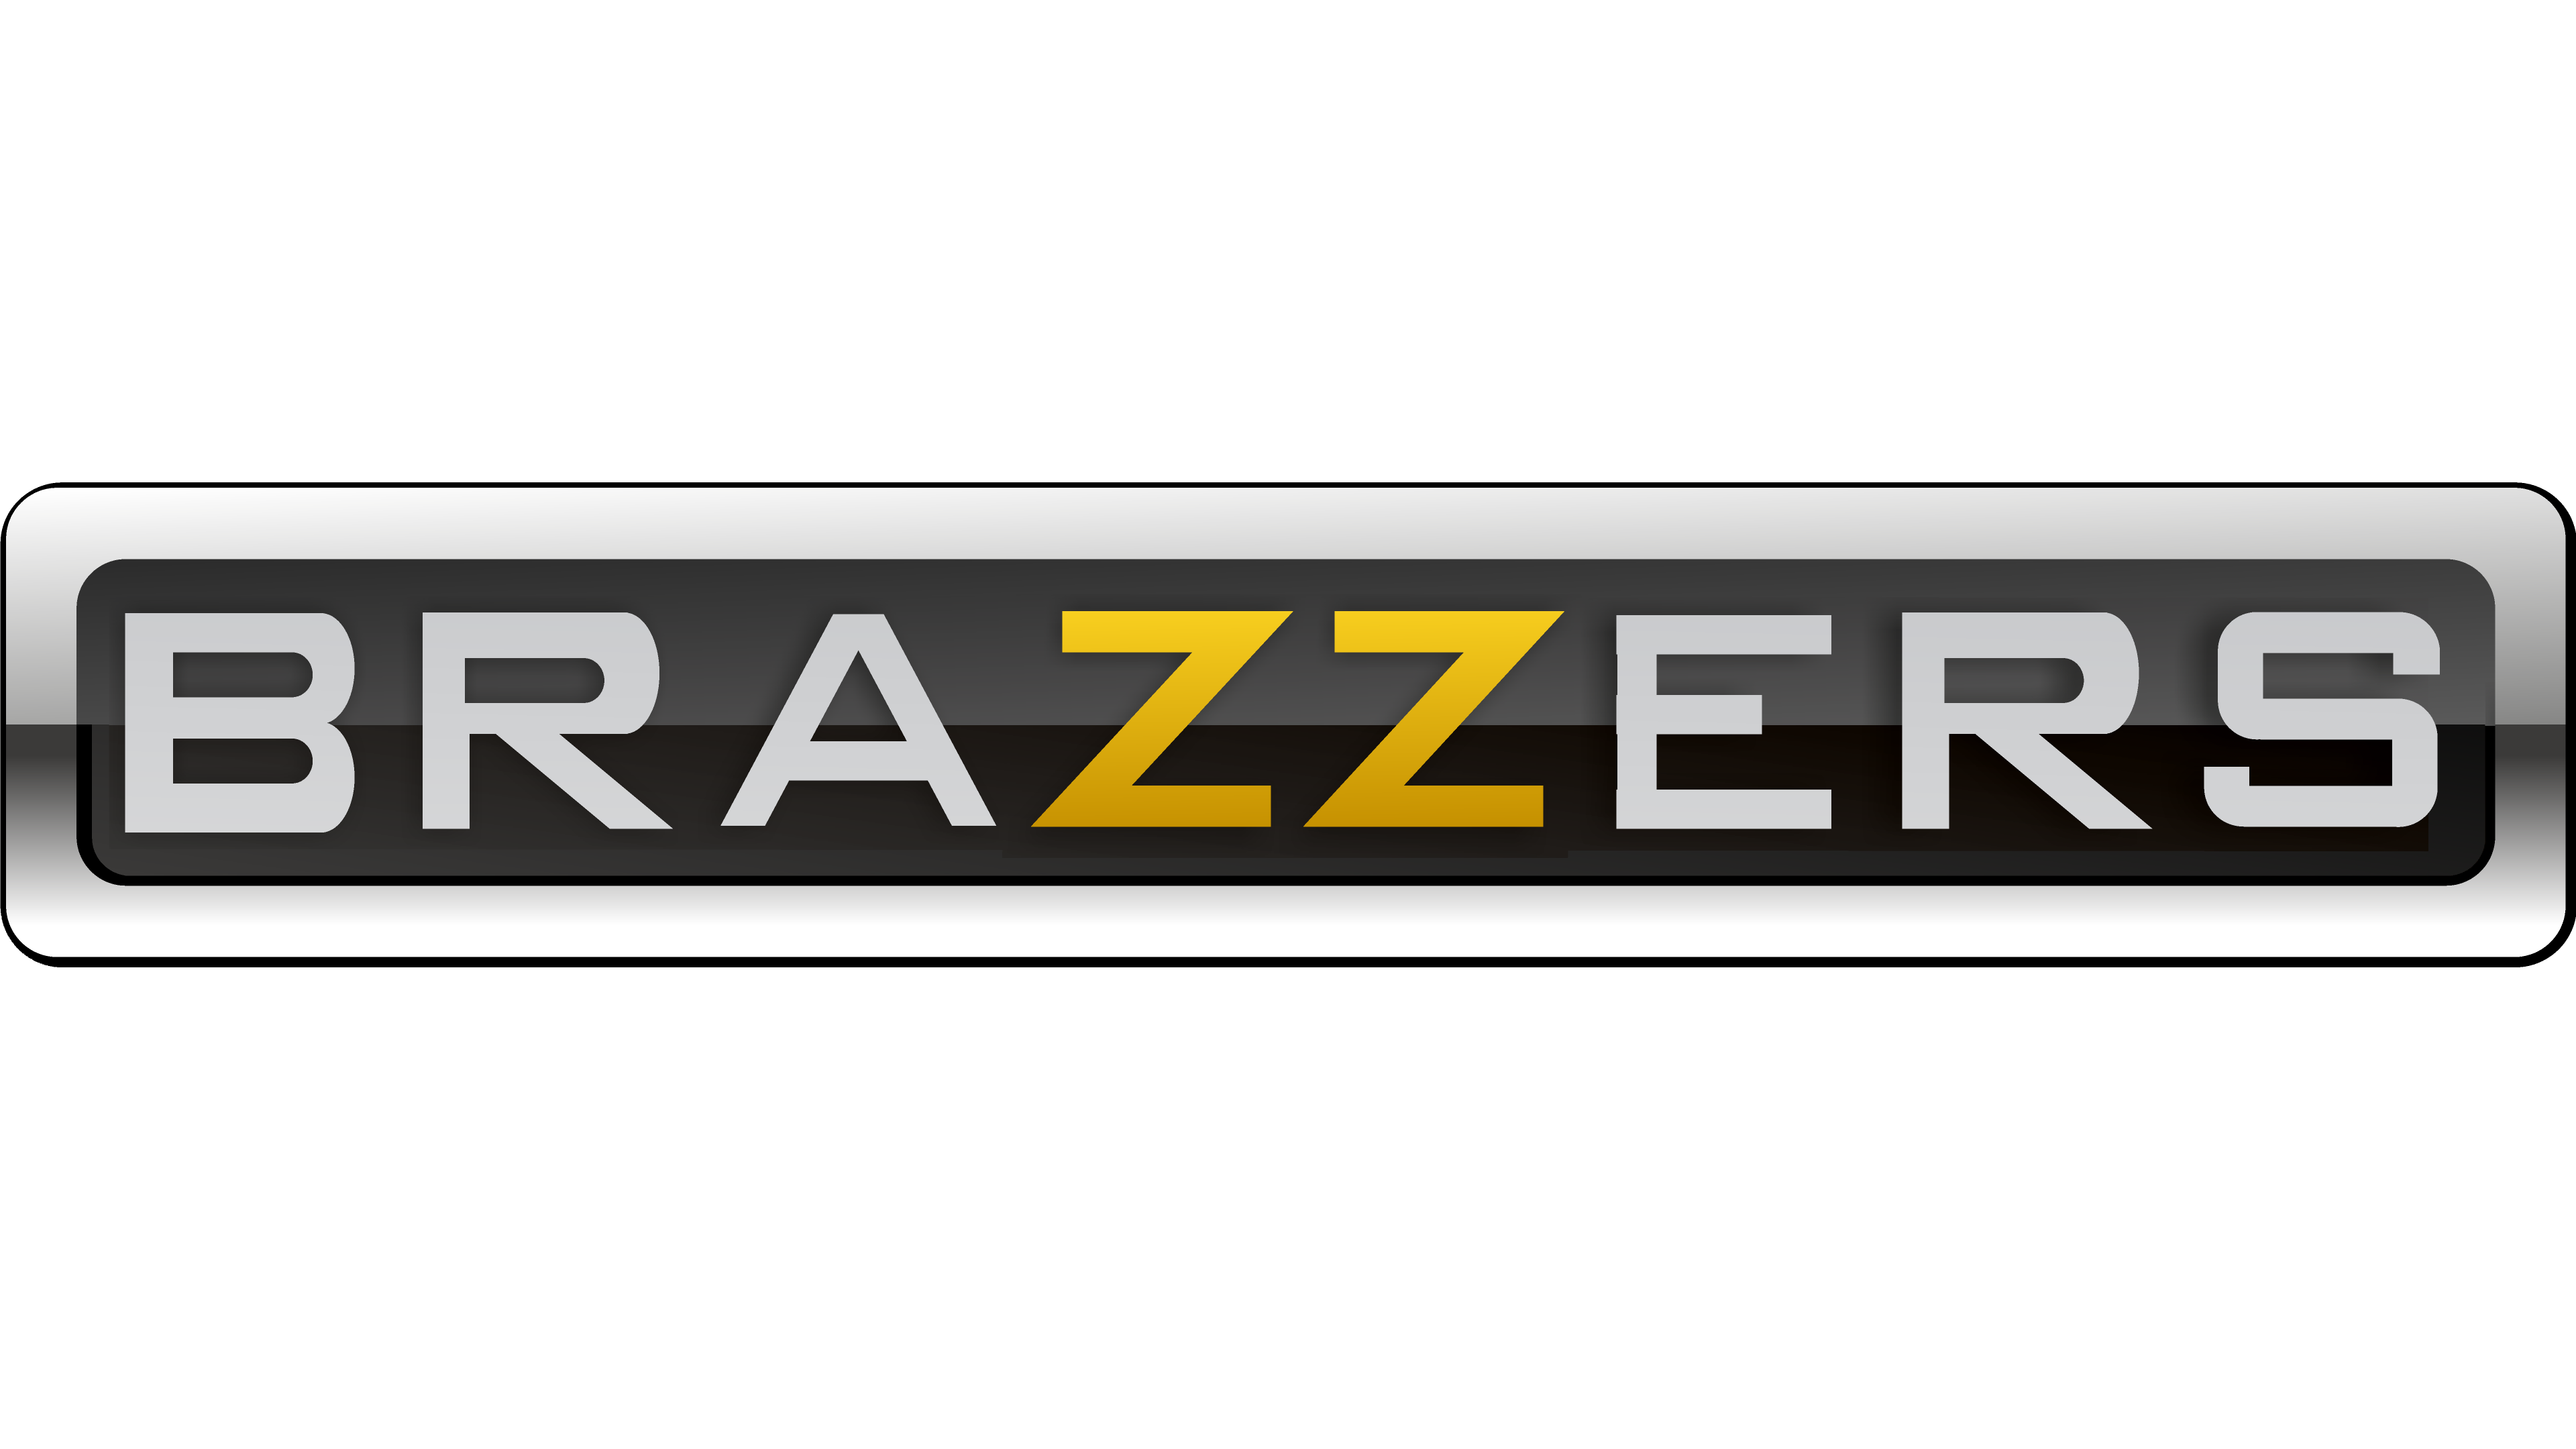 Brazzers contact